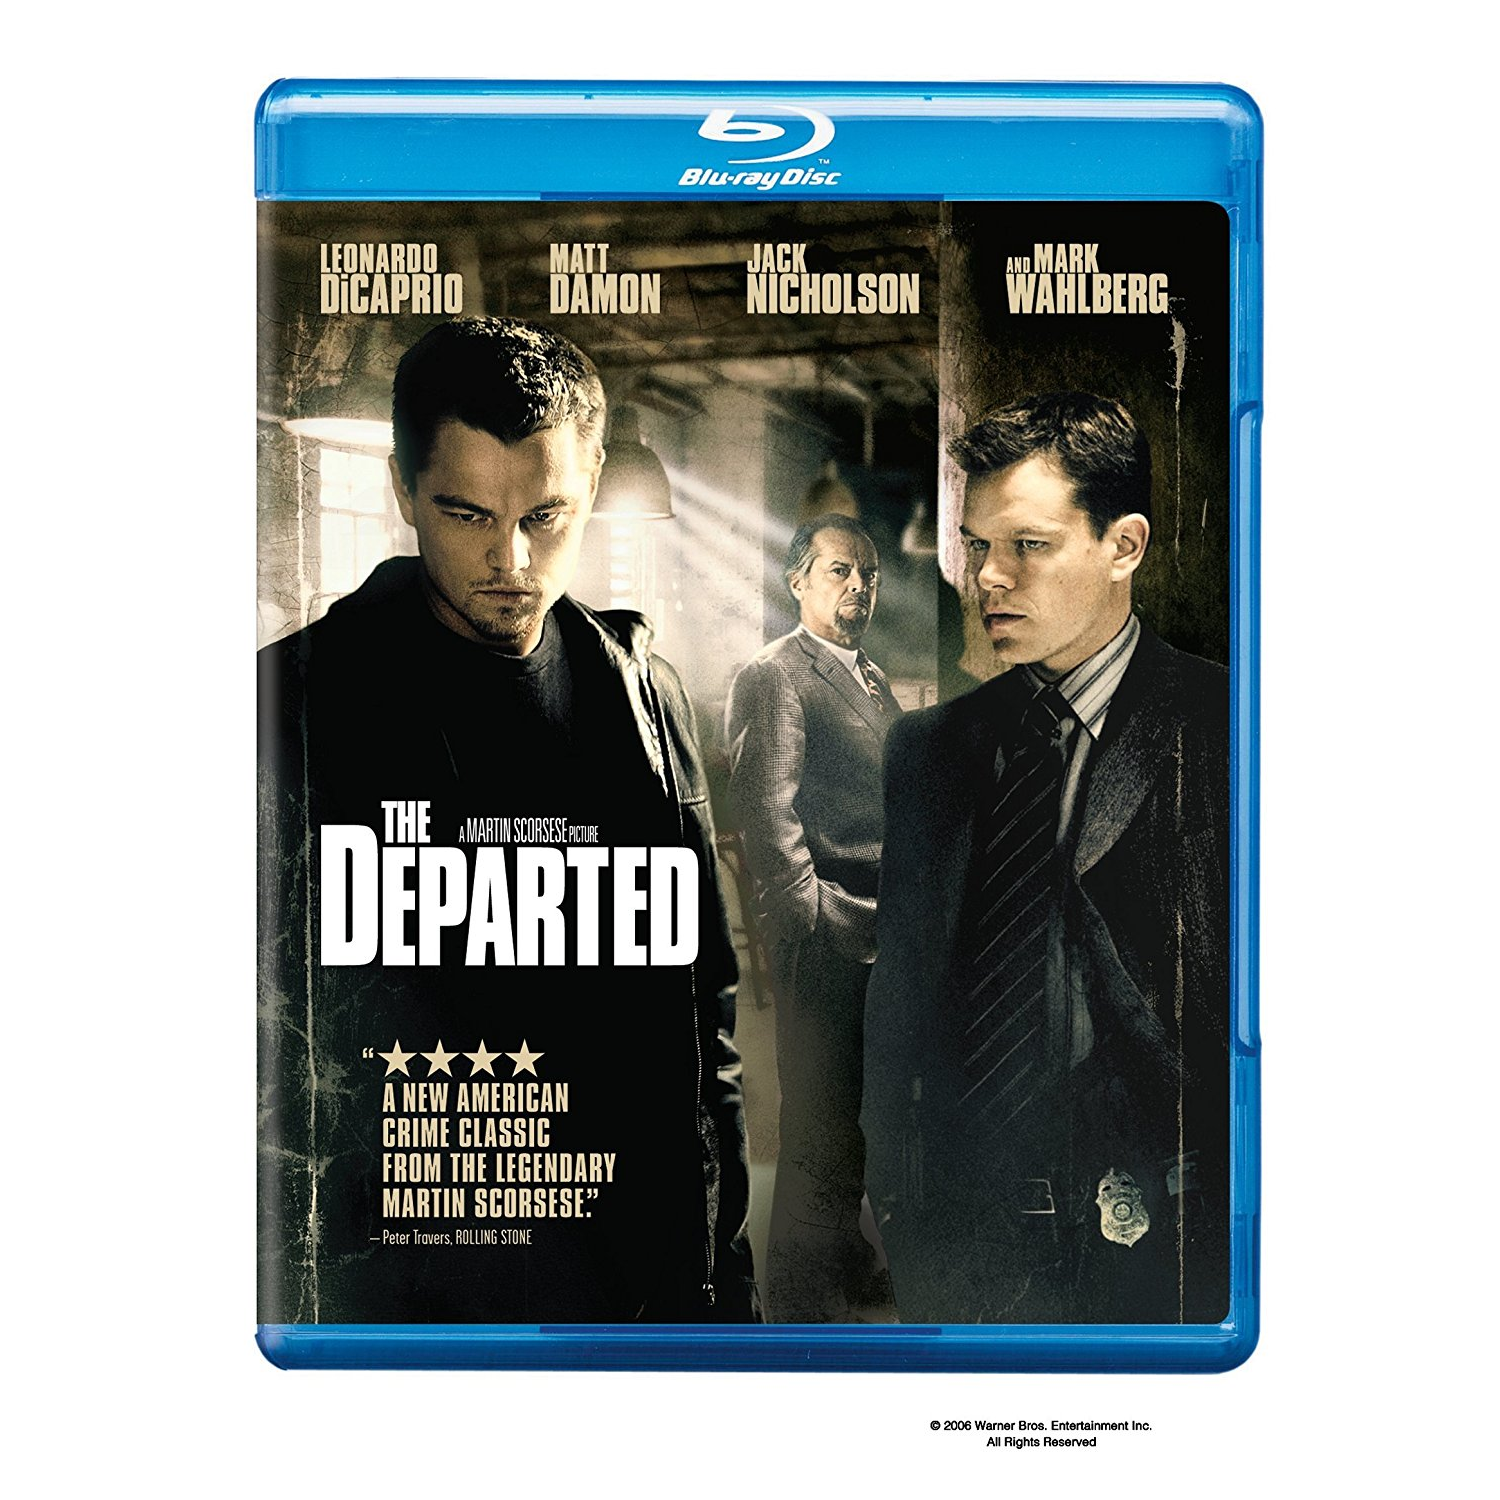 Amazon: The Departed on Blu-ray Only $5.99!